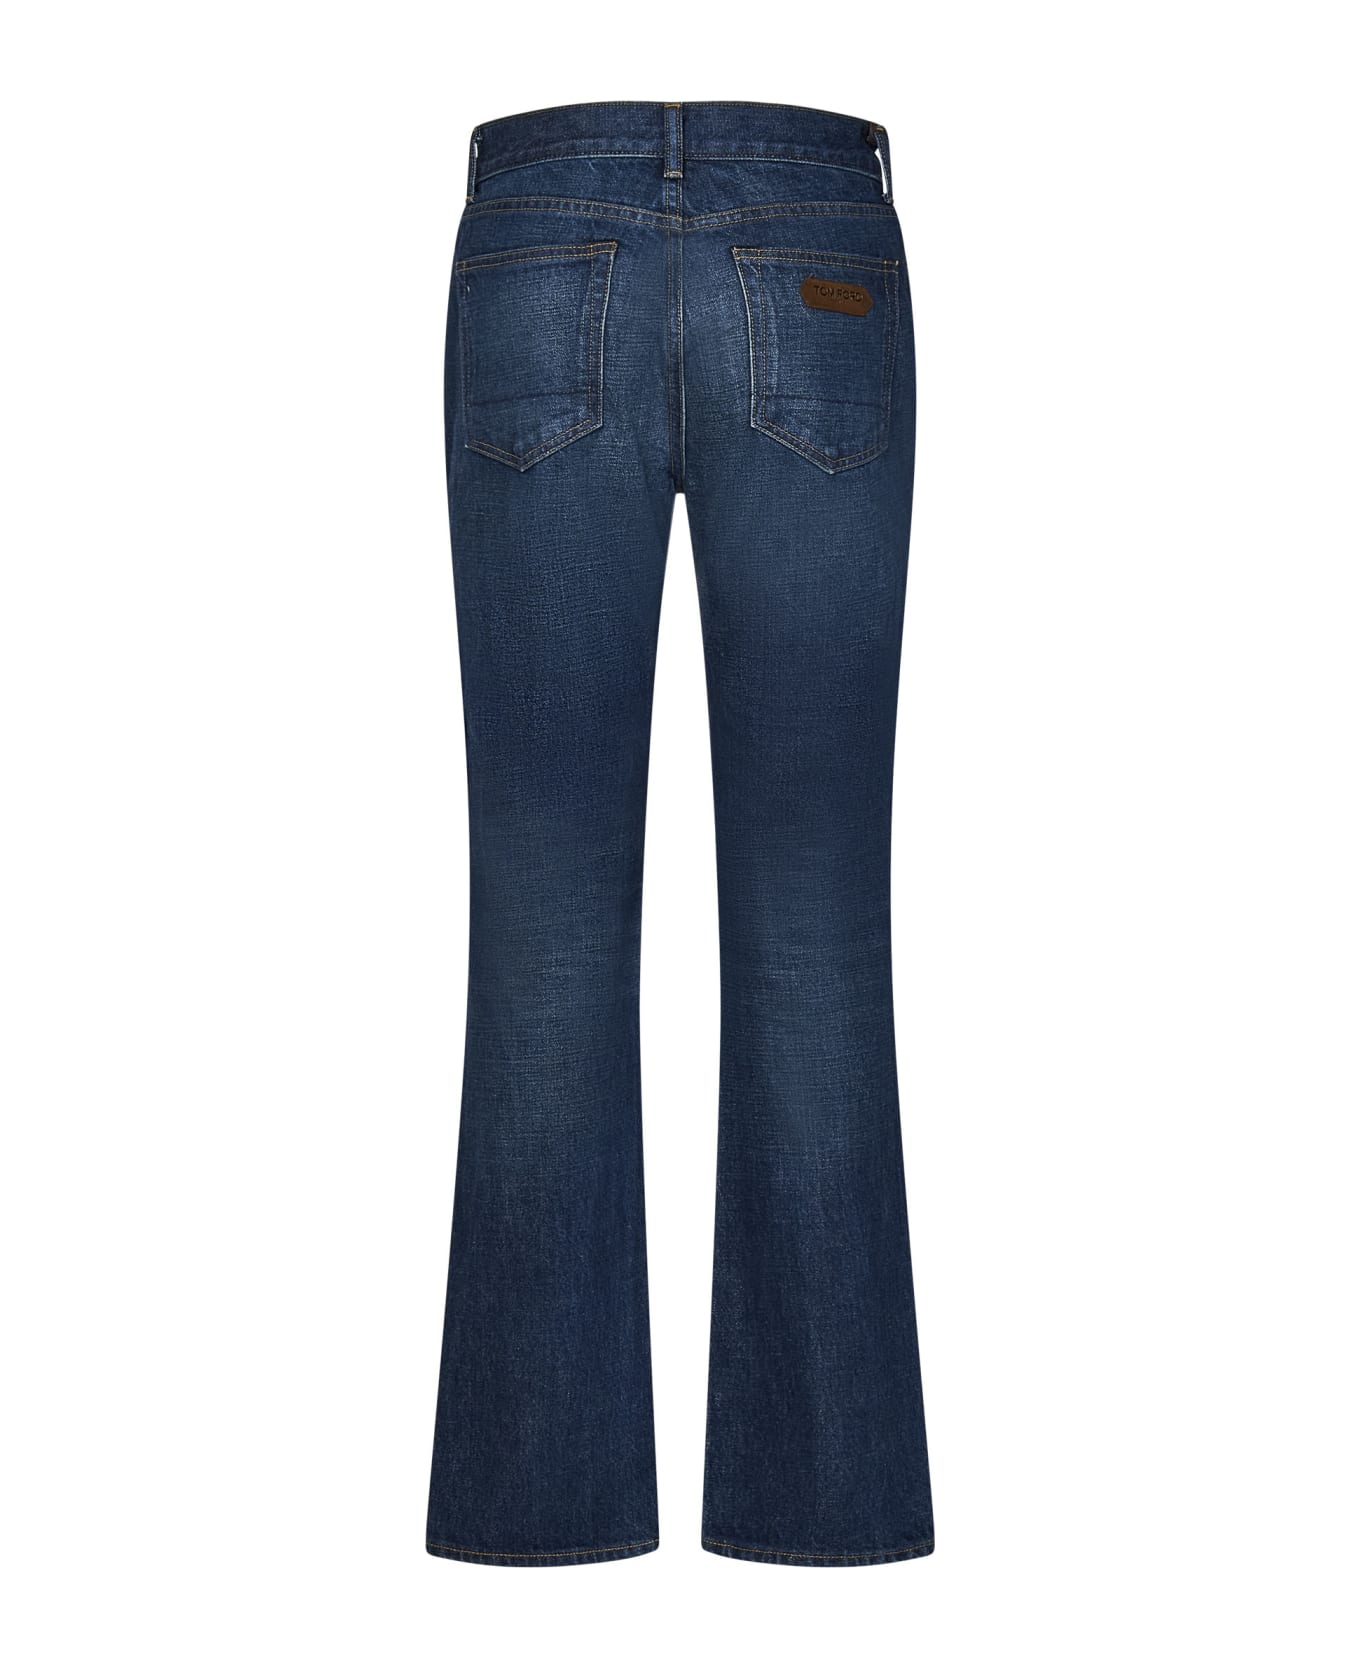 Tom Ford Jeans - MID BLUE